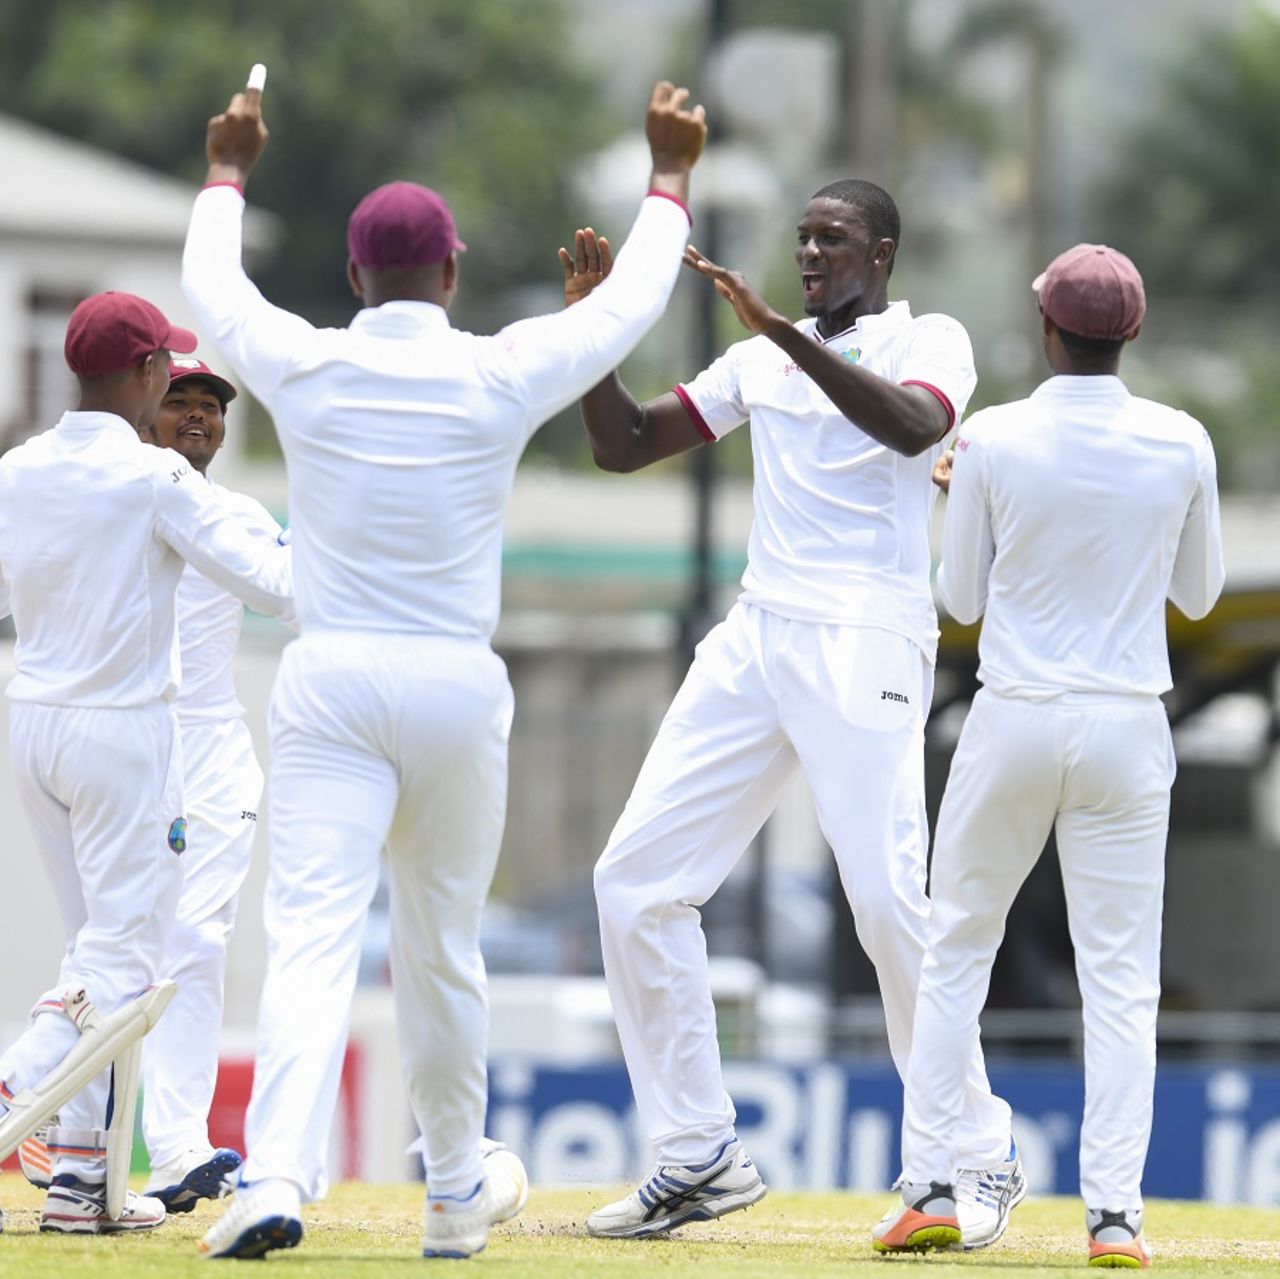 Jason Holder dismissed Sarfraz Ahmed to seal the win, West Indies v Pakistan, 2nd Test, Bridgetown, 5th day, May 4, 2017